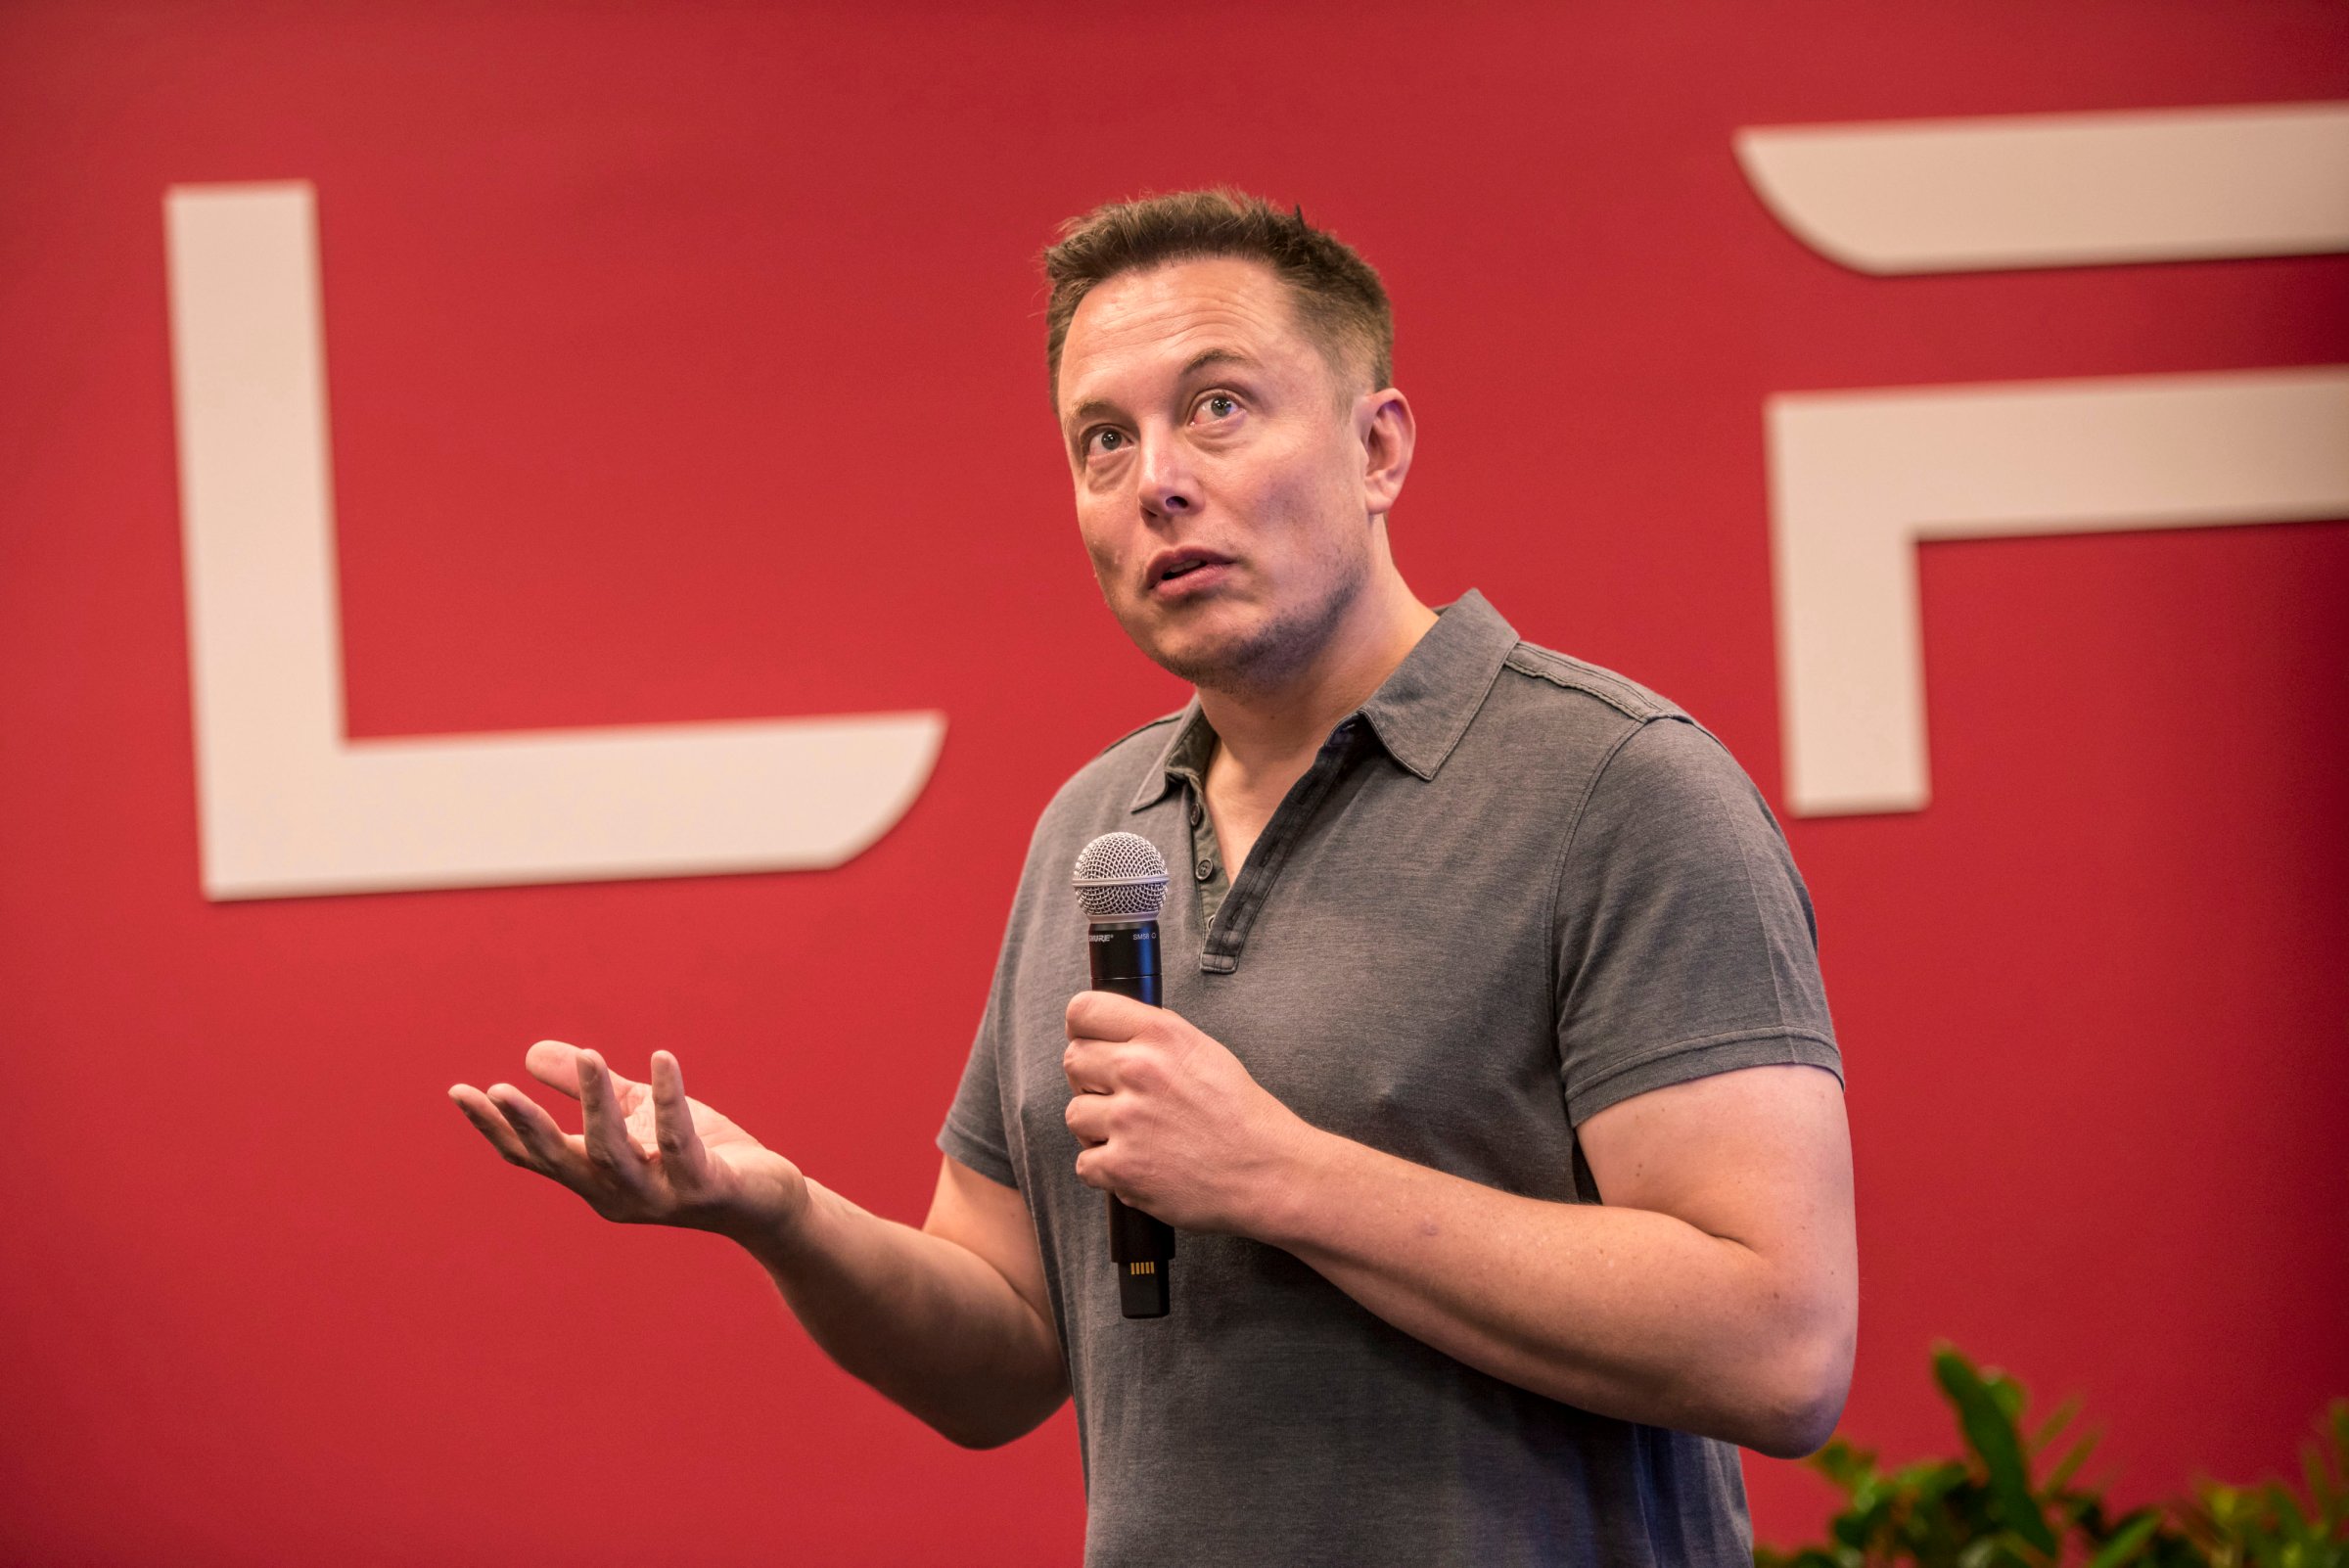 Elon Musk, chairman and chief executive officer of Tesla Motors, speaks during an event at the company's headquarters in California, on Oct. 14.